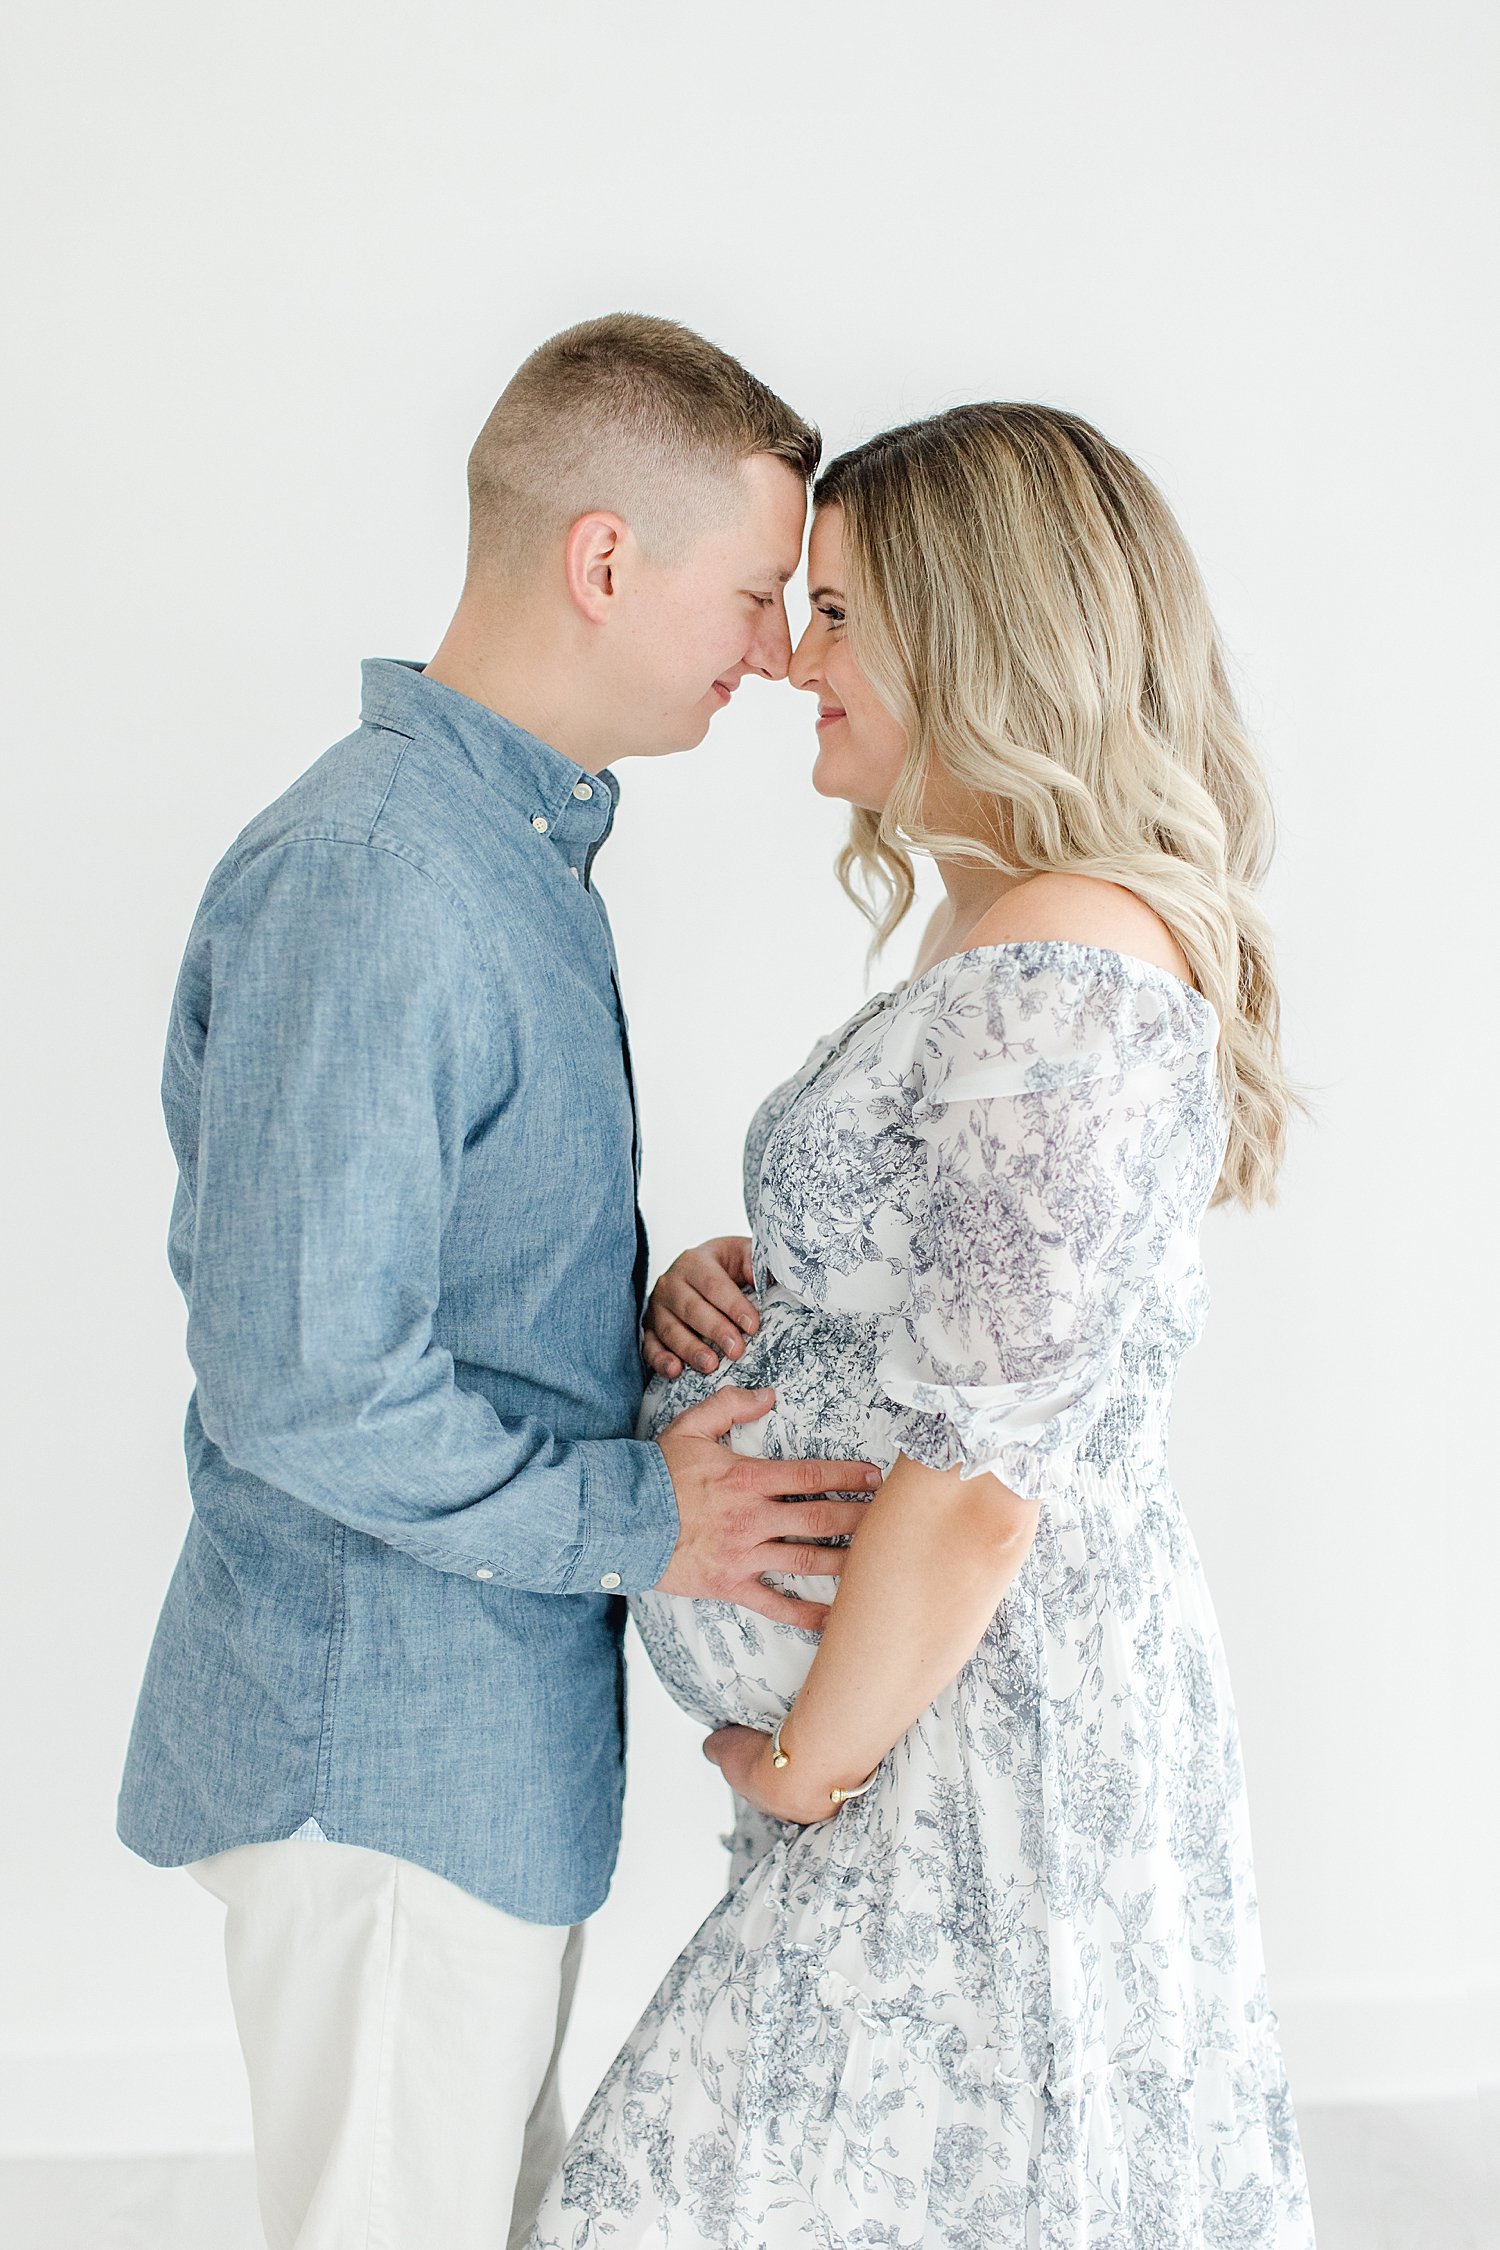 New parents celebrate pregnancy with photoshoot in studio in Westport with Kristin Wood Photography.